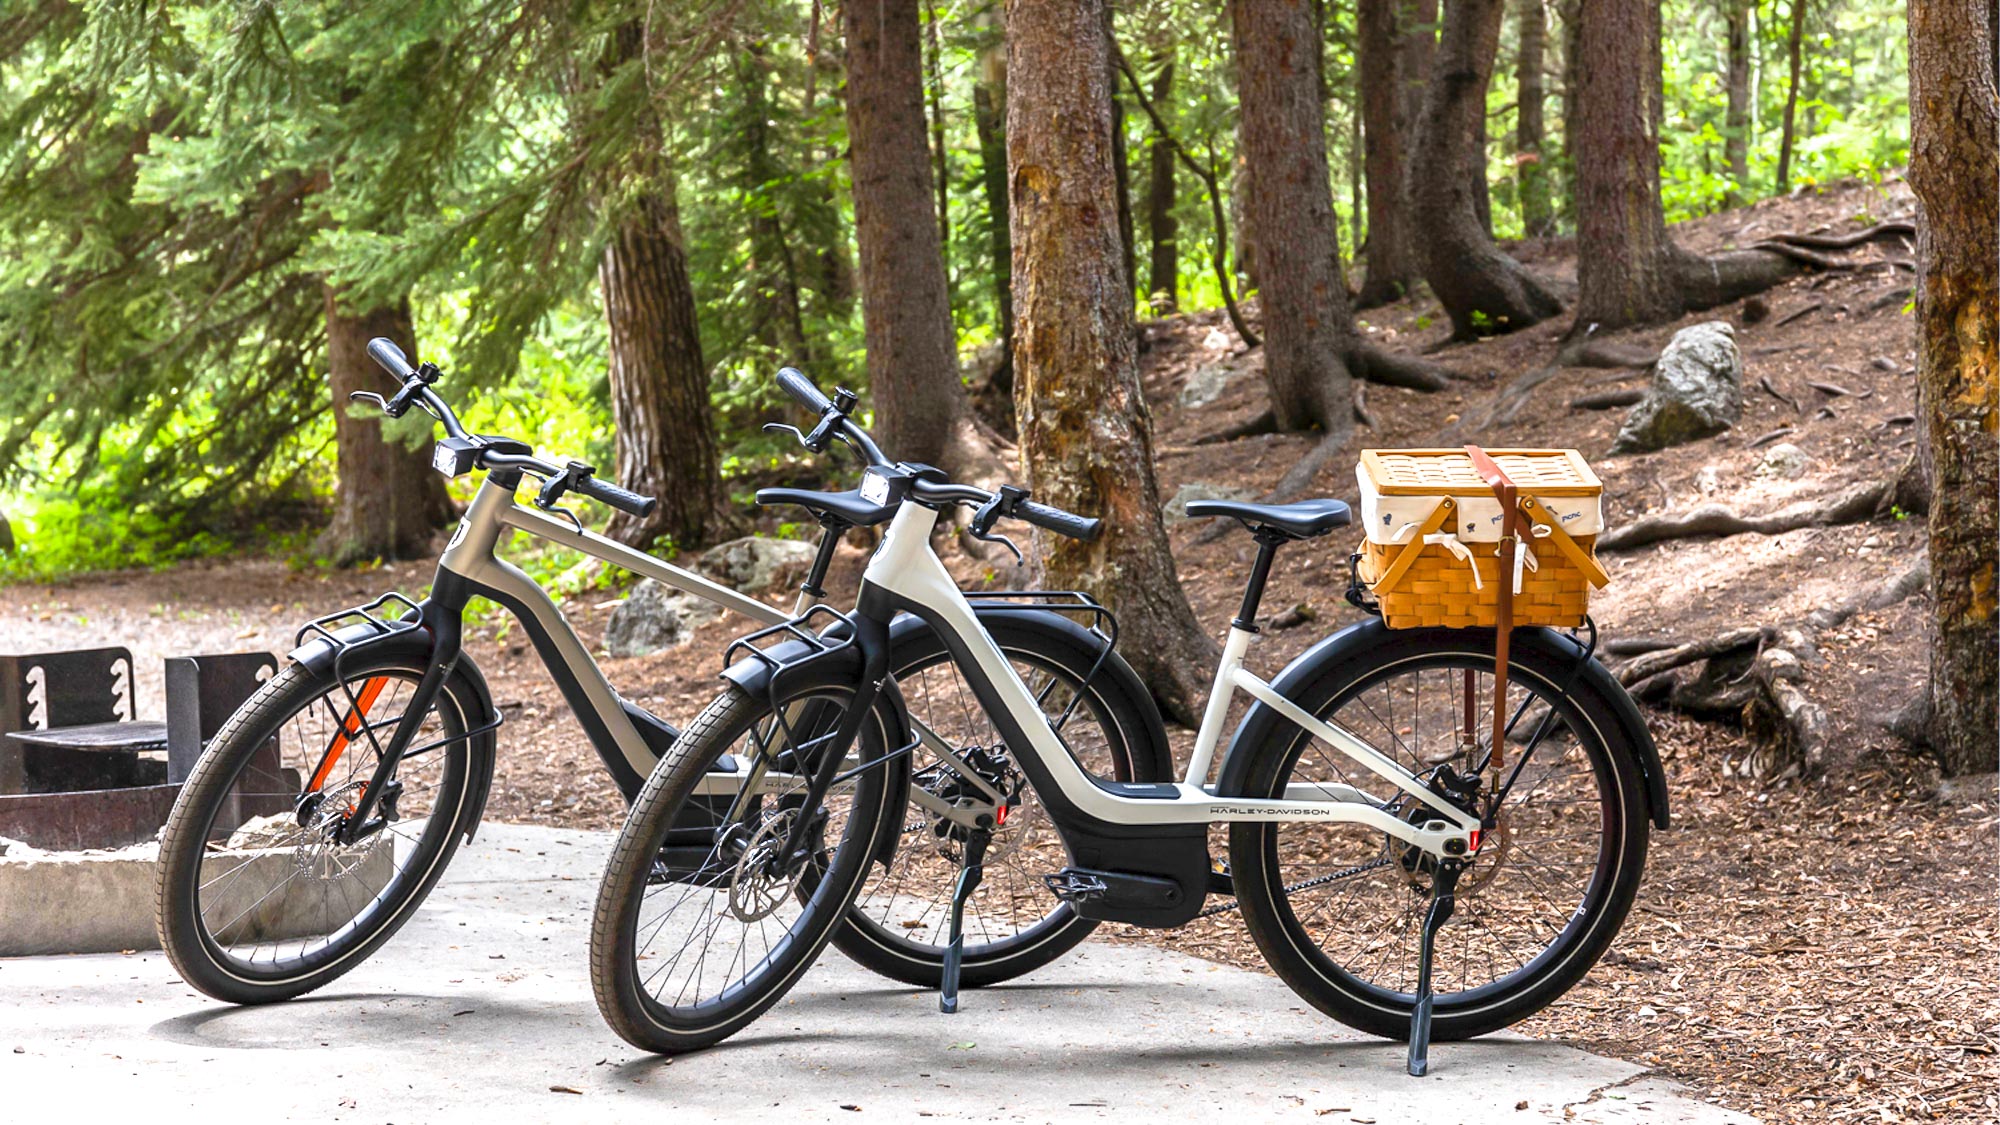 alignment Misery Paternal Serial 1 Rush/Cty eBike review: A Harley for electric bikes | Tom's Guide